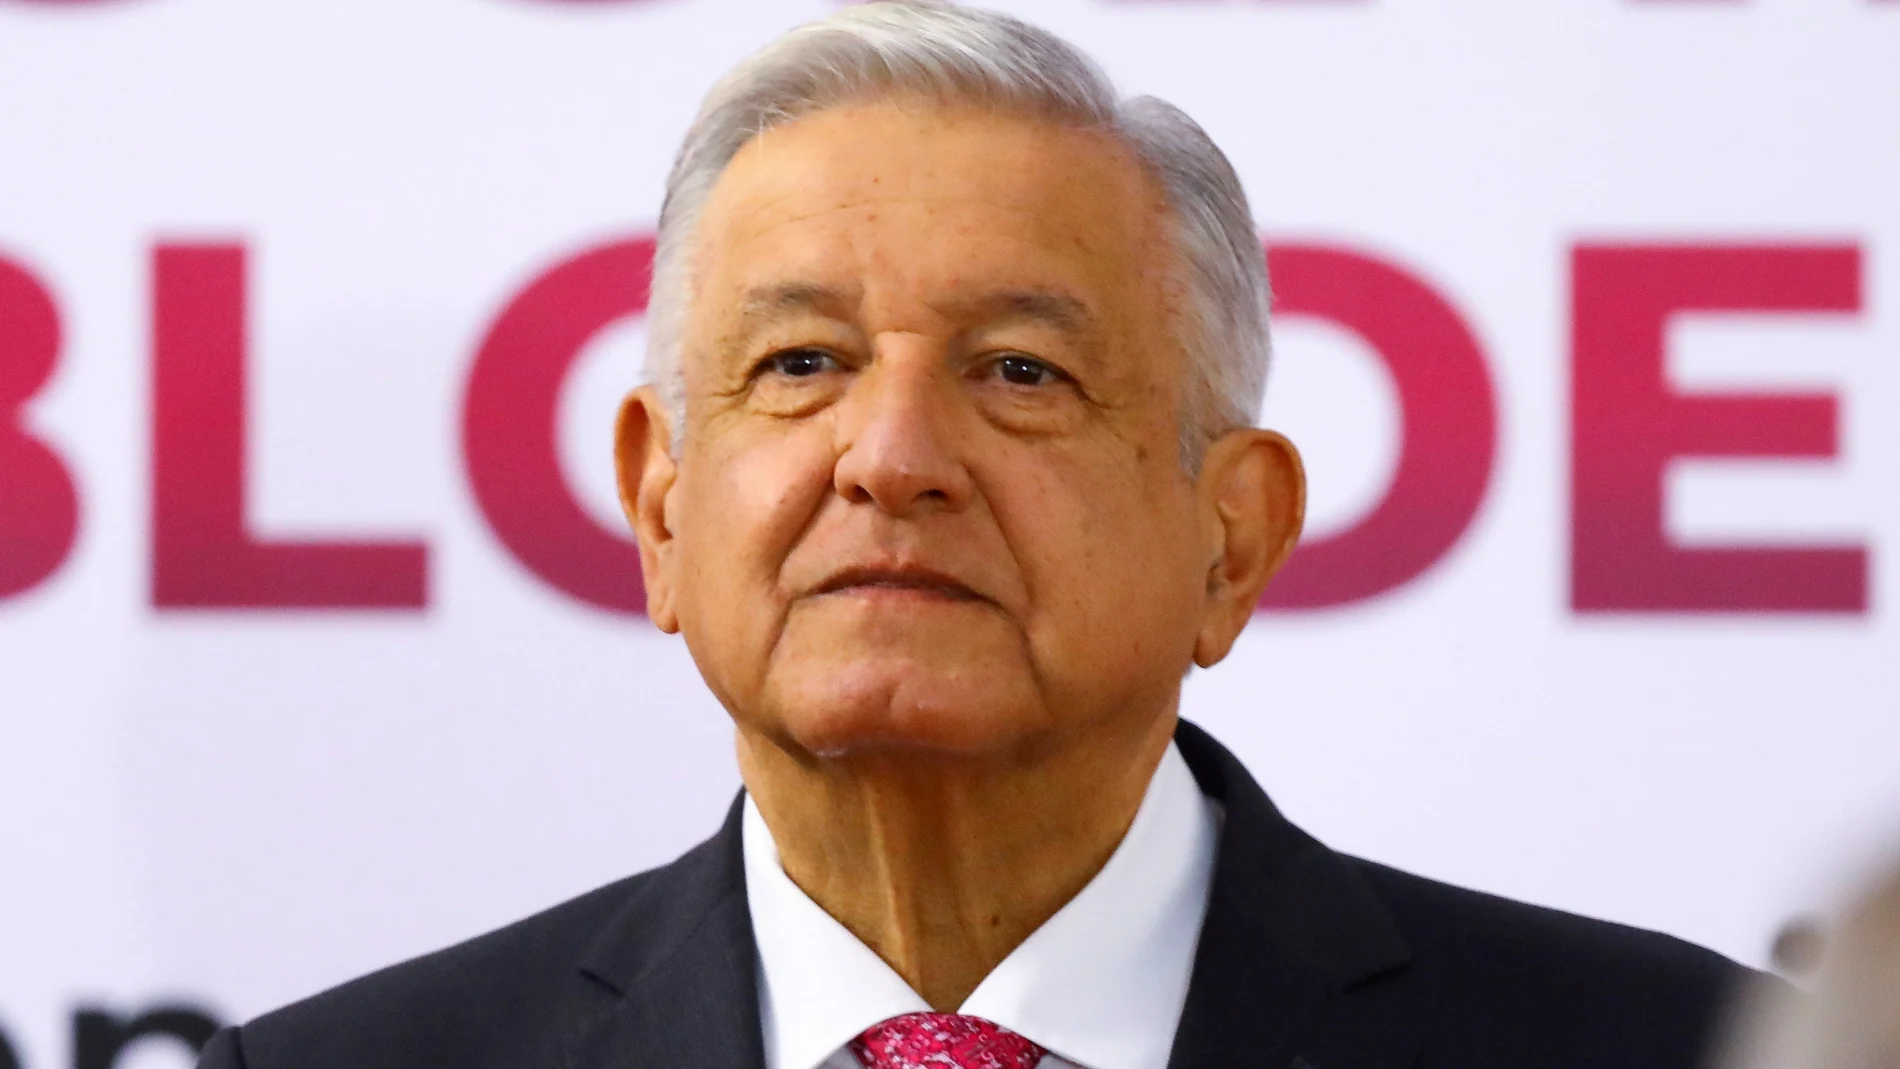 FILE PHOTO: Mexico's President Andres Manuel Lopez Obrador looks on during a commemoration on the third anniversary of his presidential election victory at National Palace in Mexico City, Mexico July 1, 2021. REUTERS/Edgard Garrido/File Photo